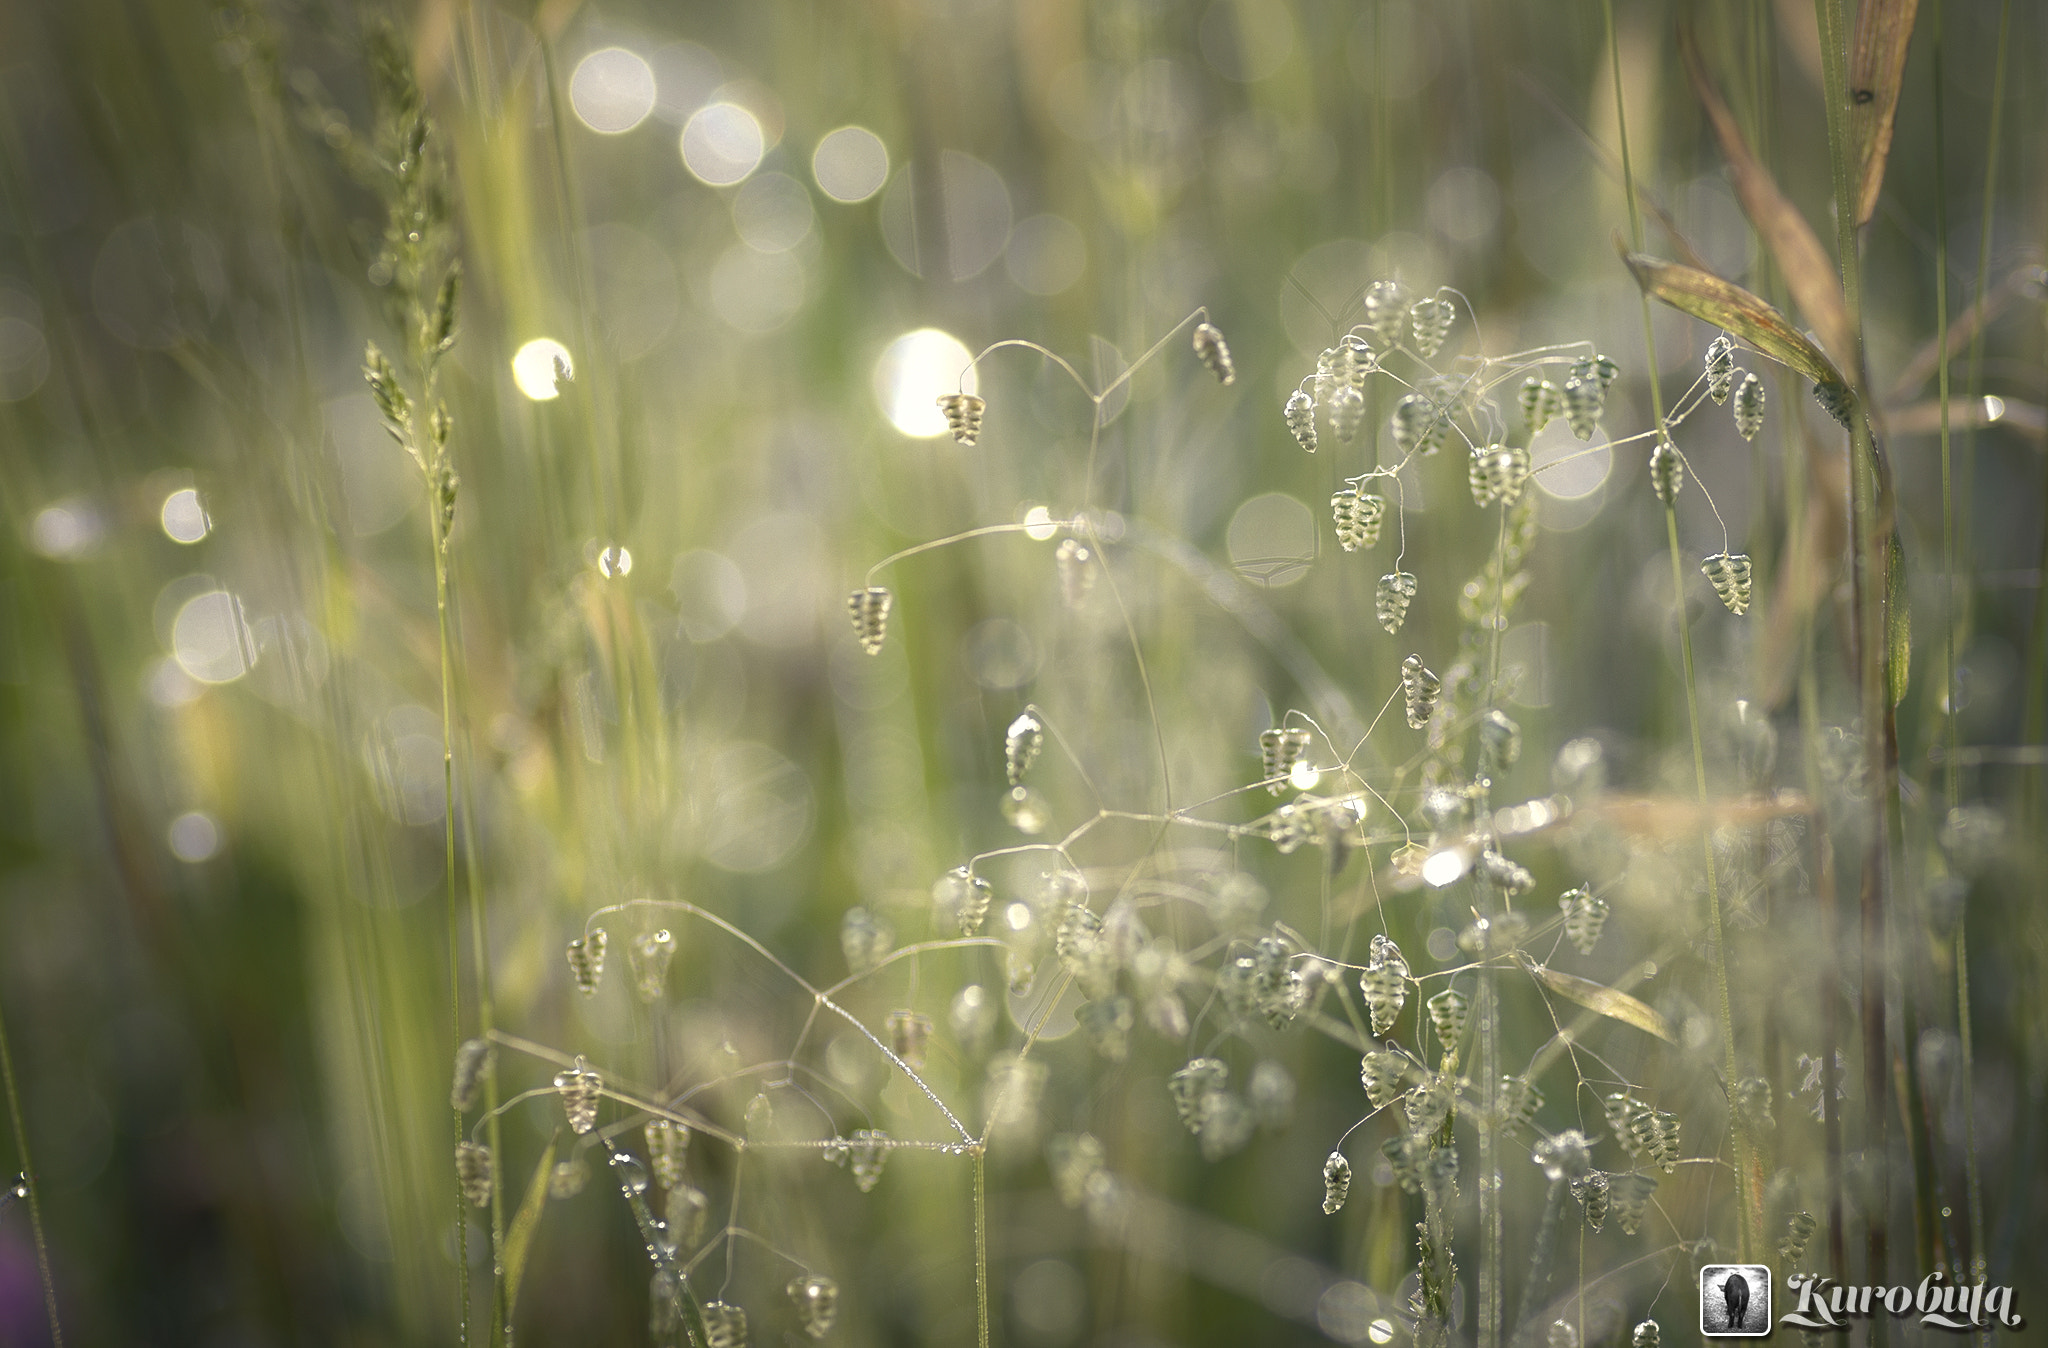 Pentax K-5 II sample photo. It pretty wild grass. i do not even know the name. photography